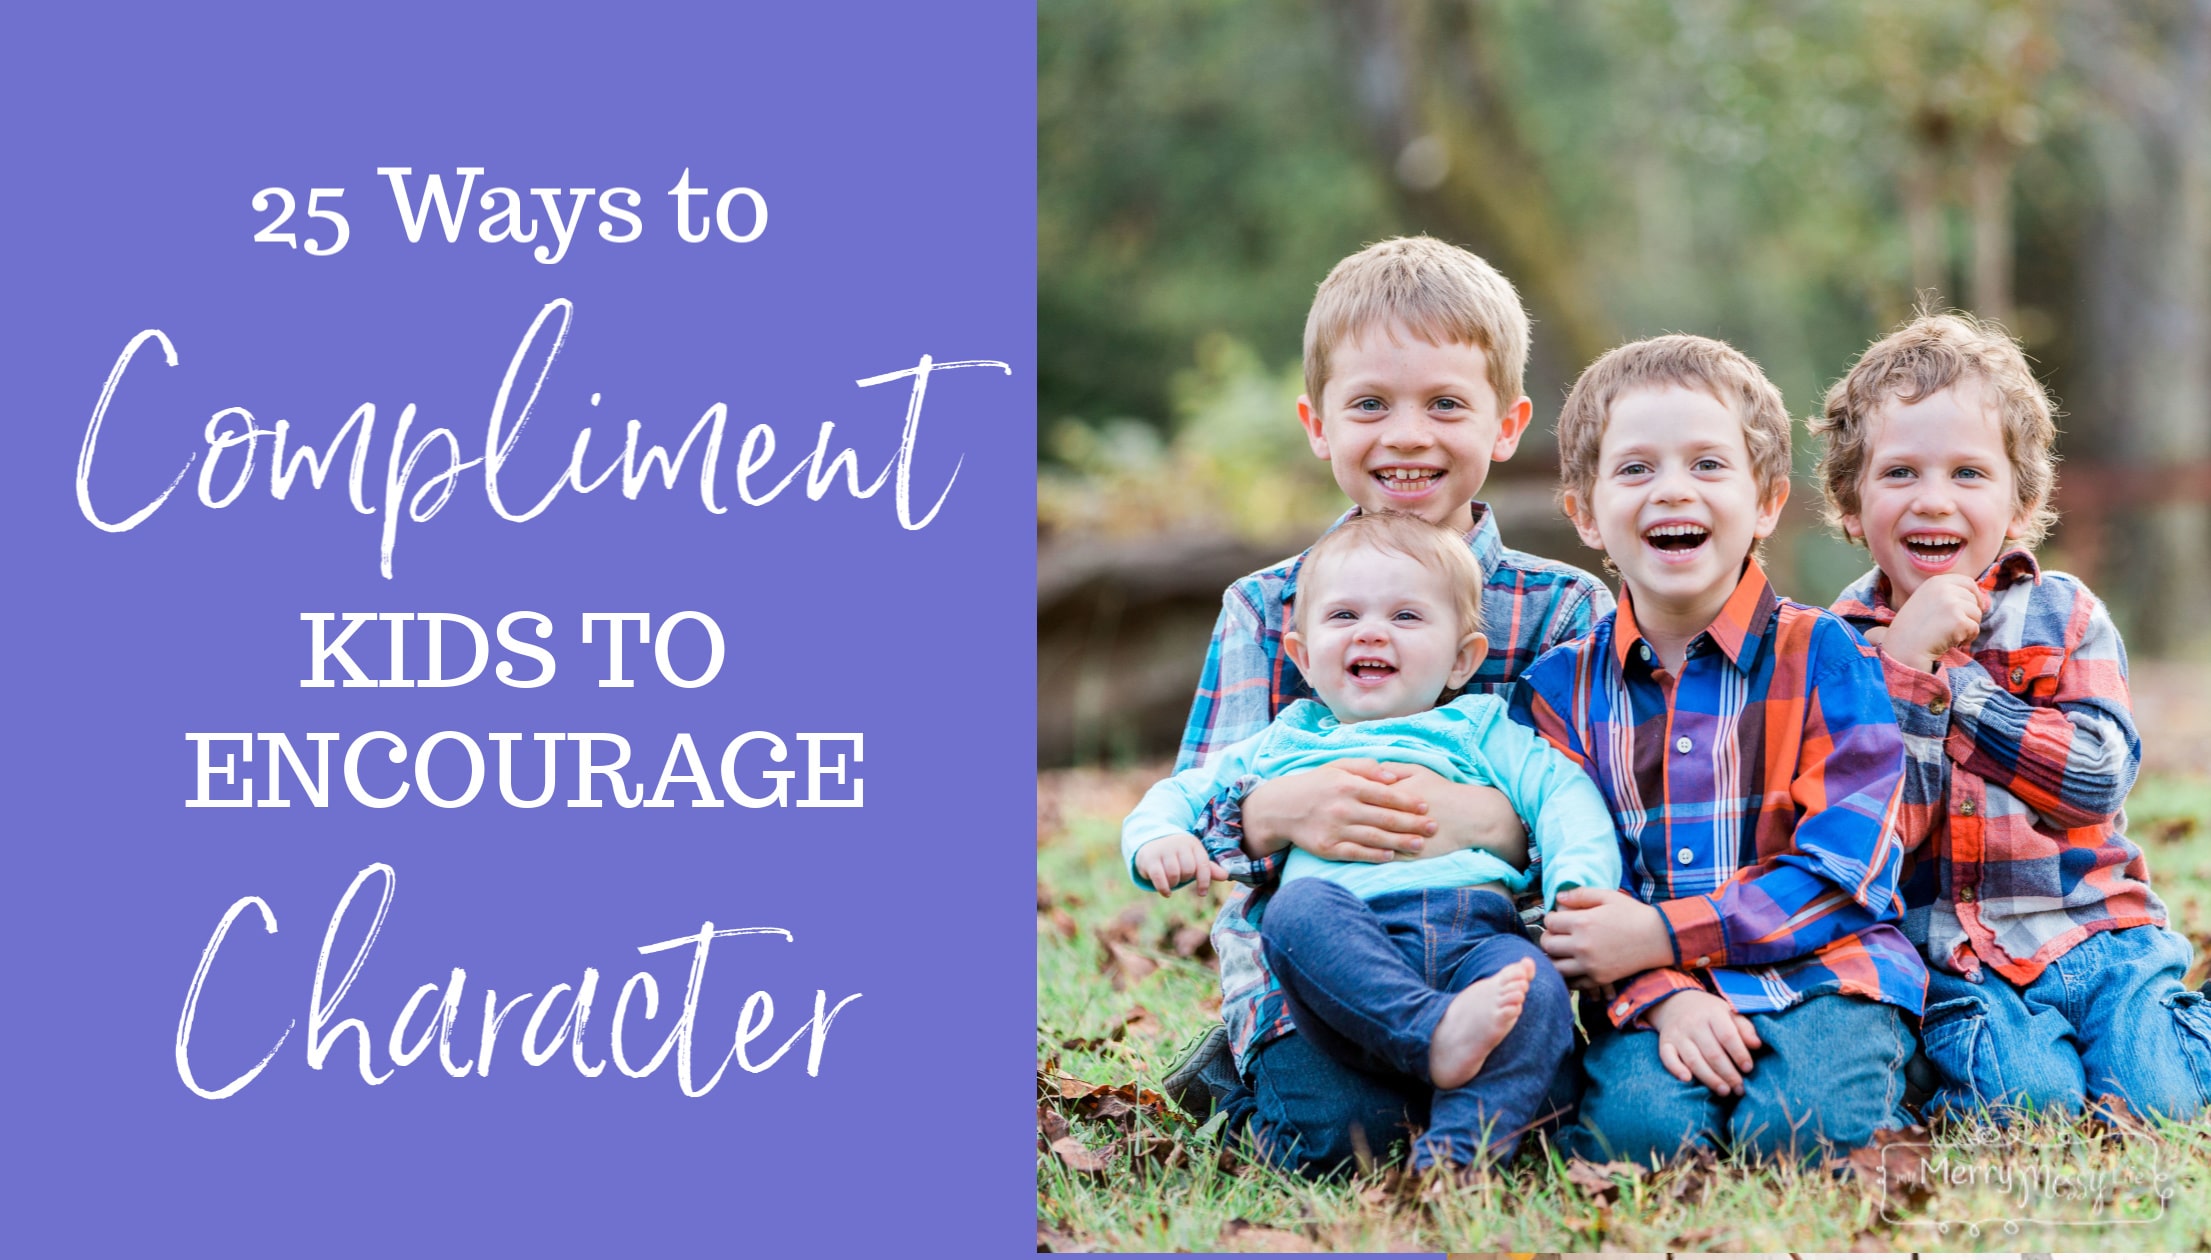 25 Ways to Compliment Kids to Encourage Character (Process over Results)